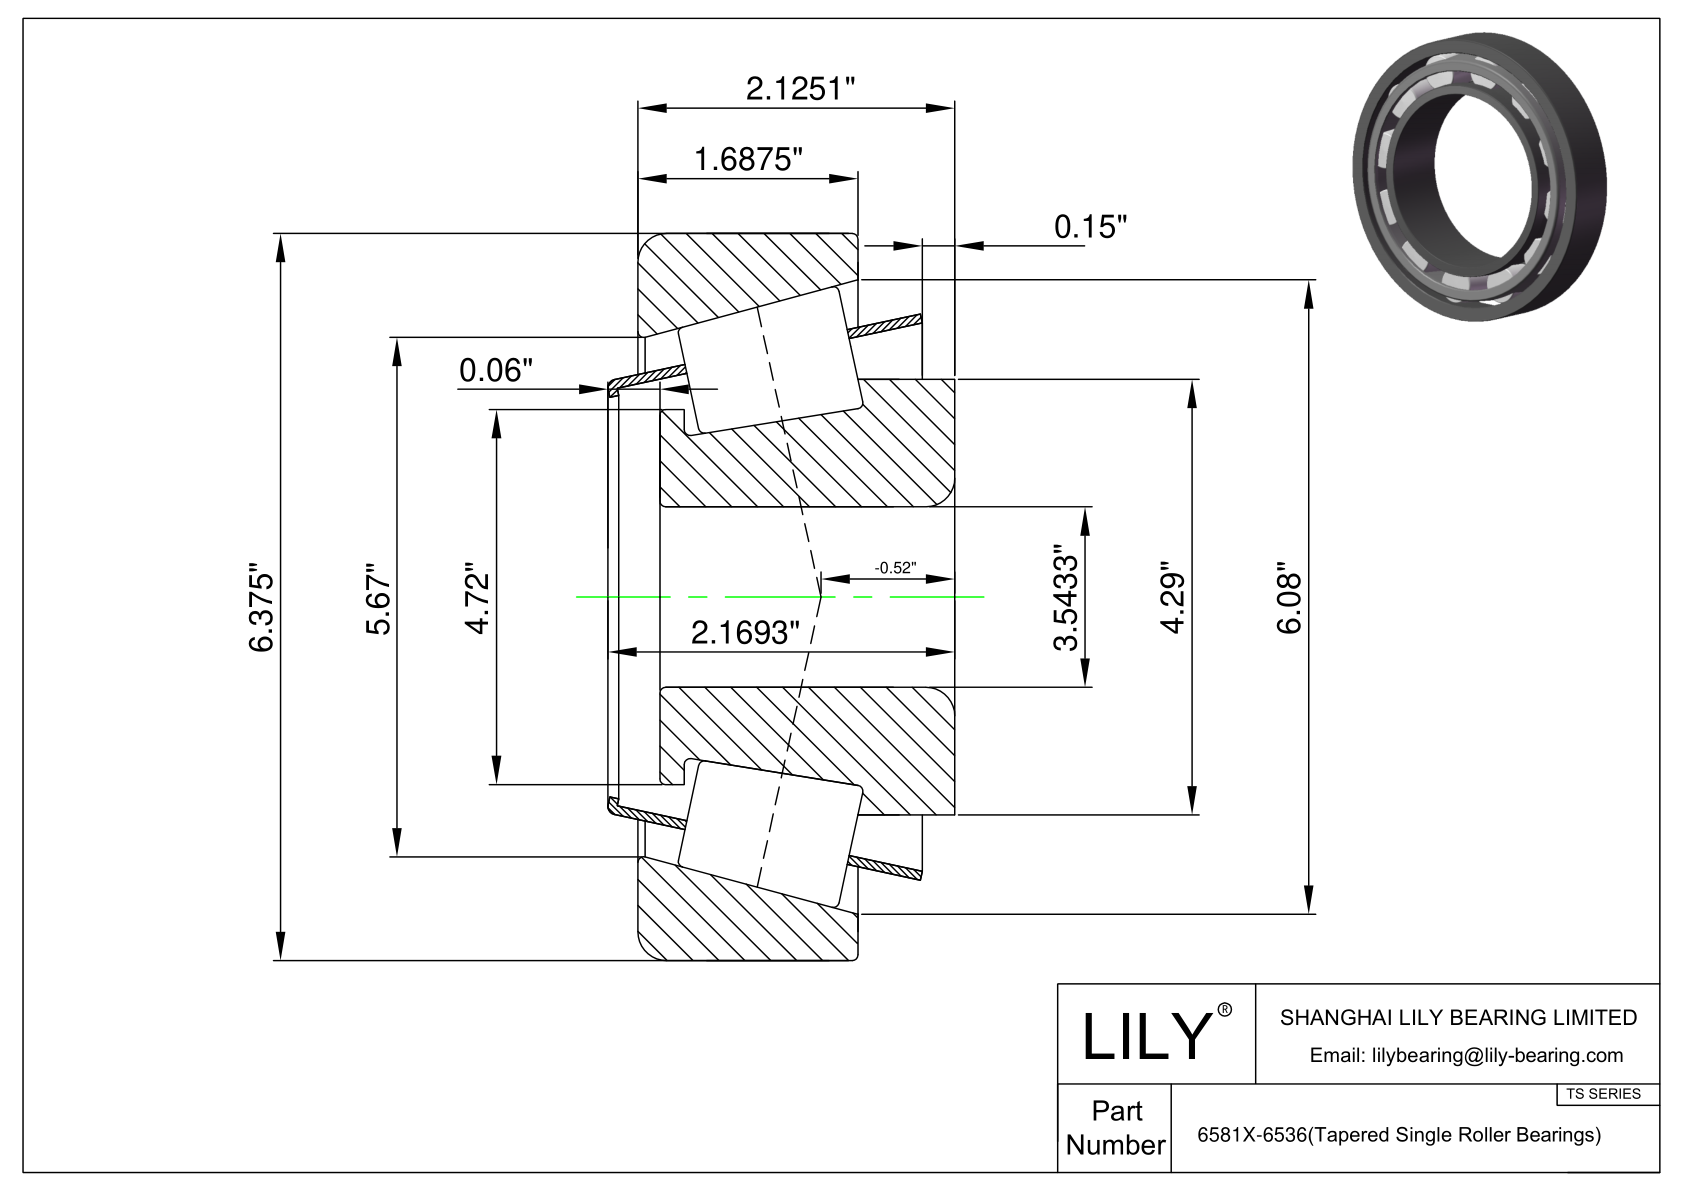 6581X-6536 TS (Tapered Single Roller Bearings) (Imperial) cad drawing